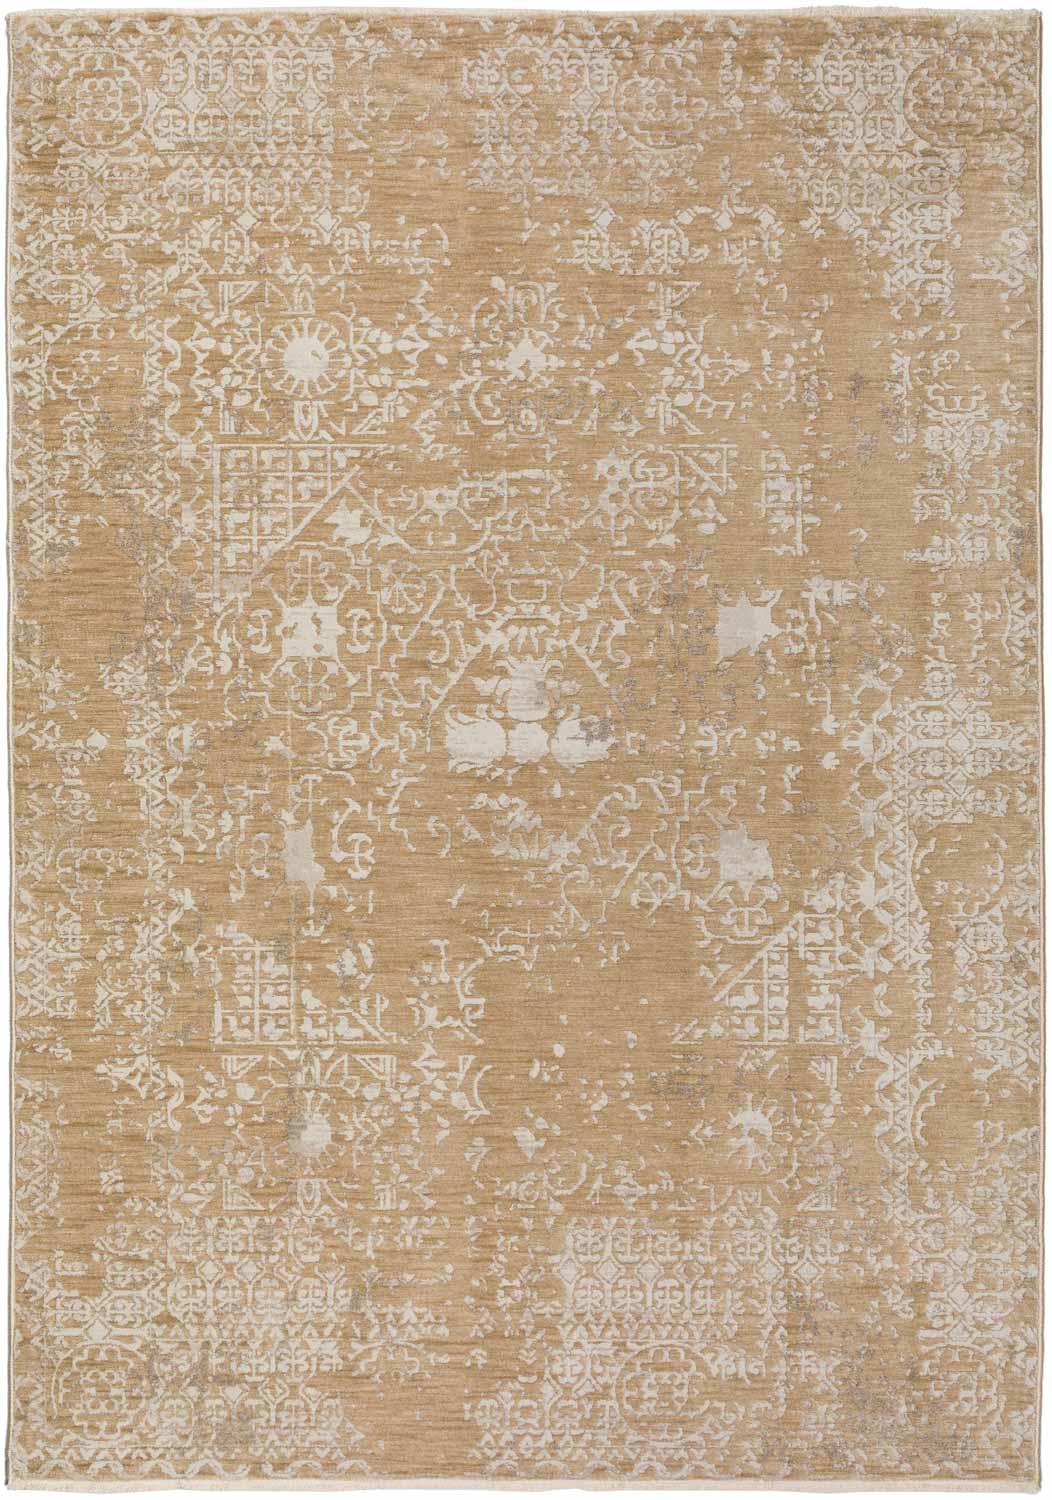 modern reproduction of a beige and honey colored rug with white details